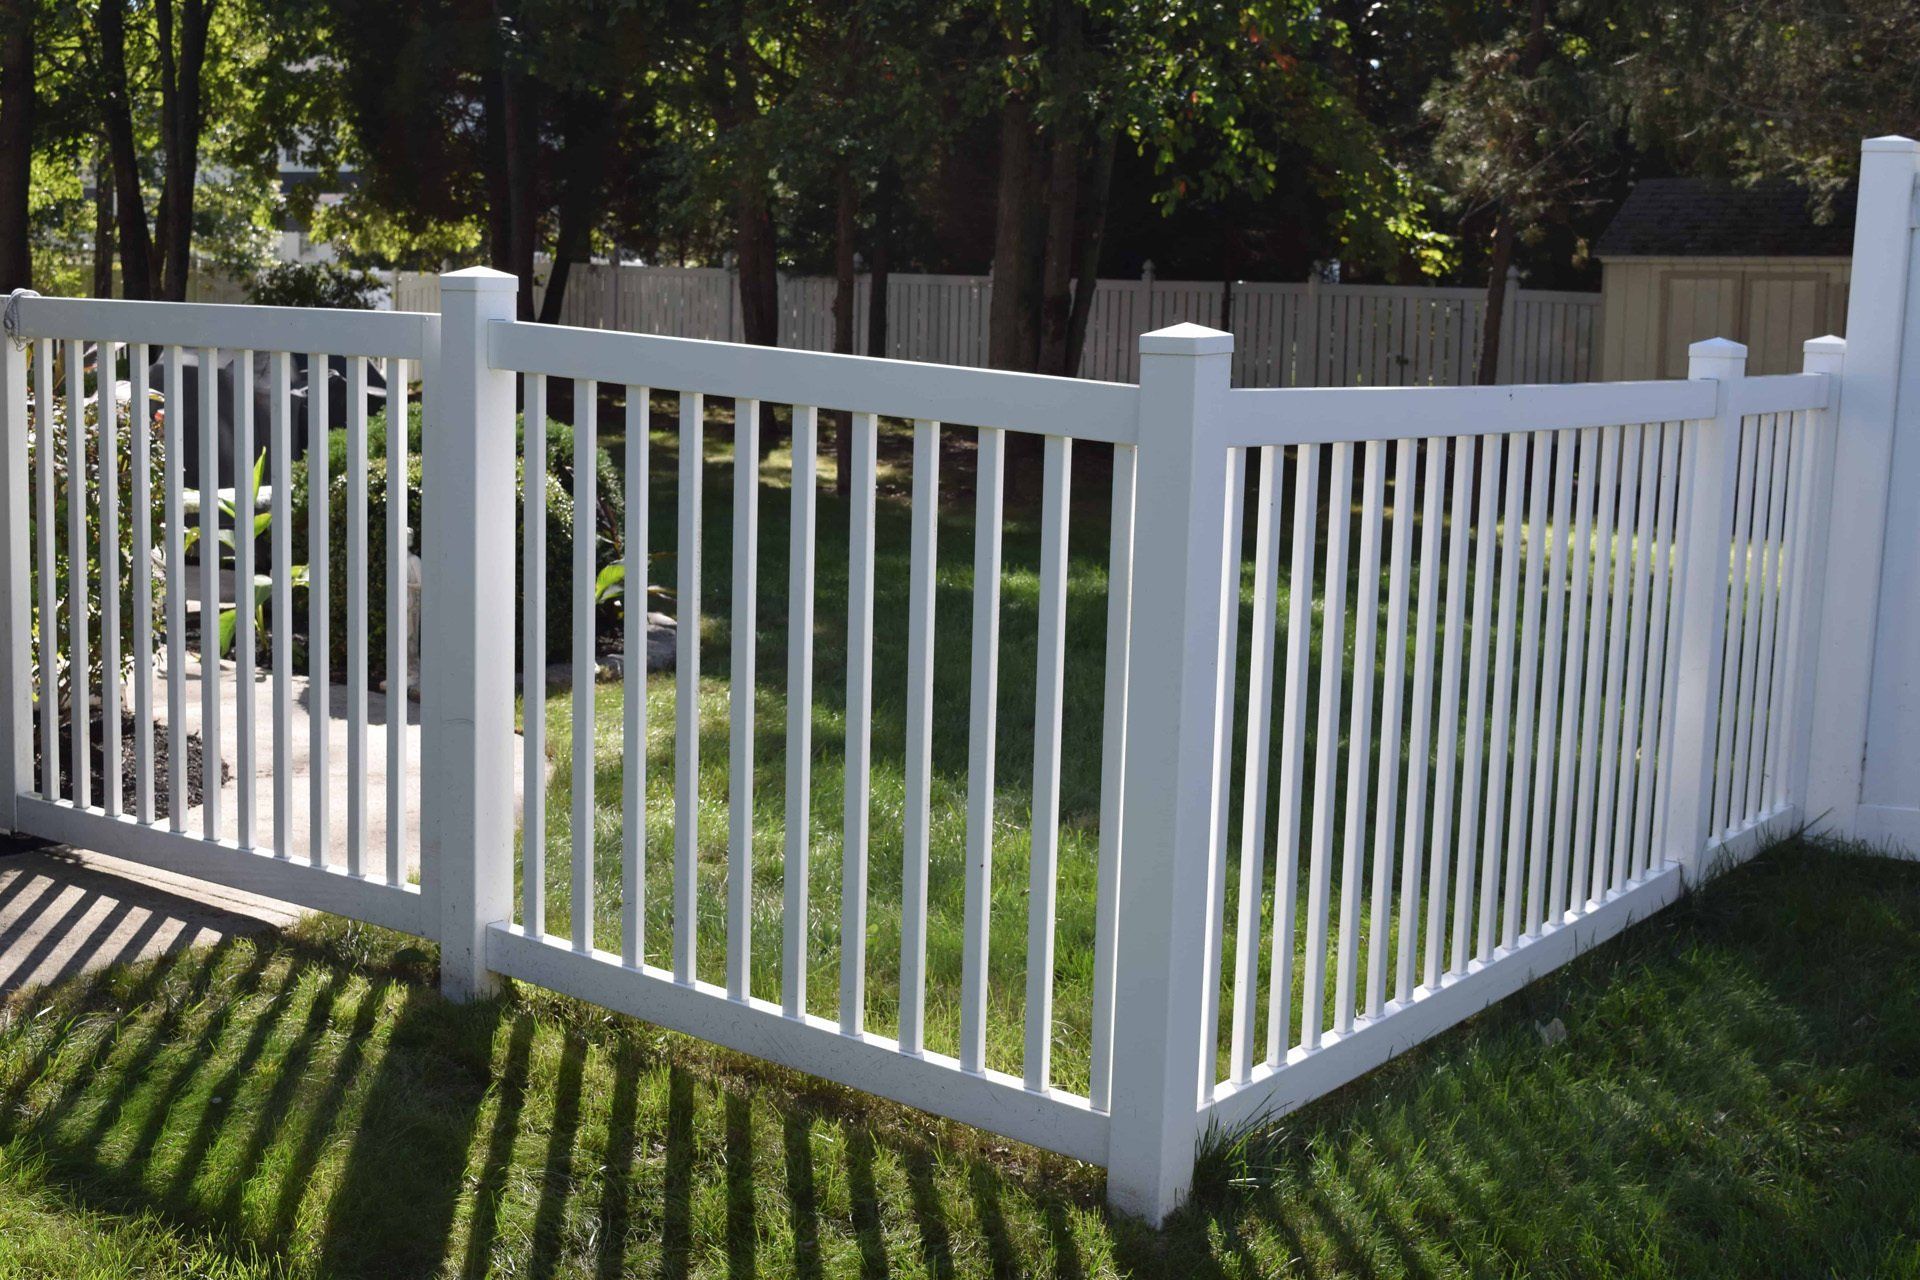 Vinyl fence is a decorative fencing solution